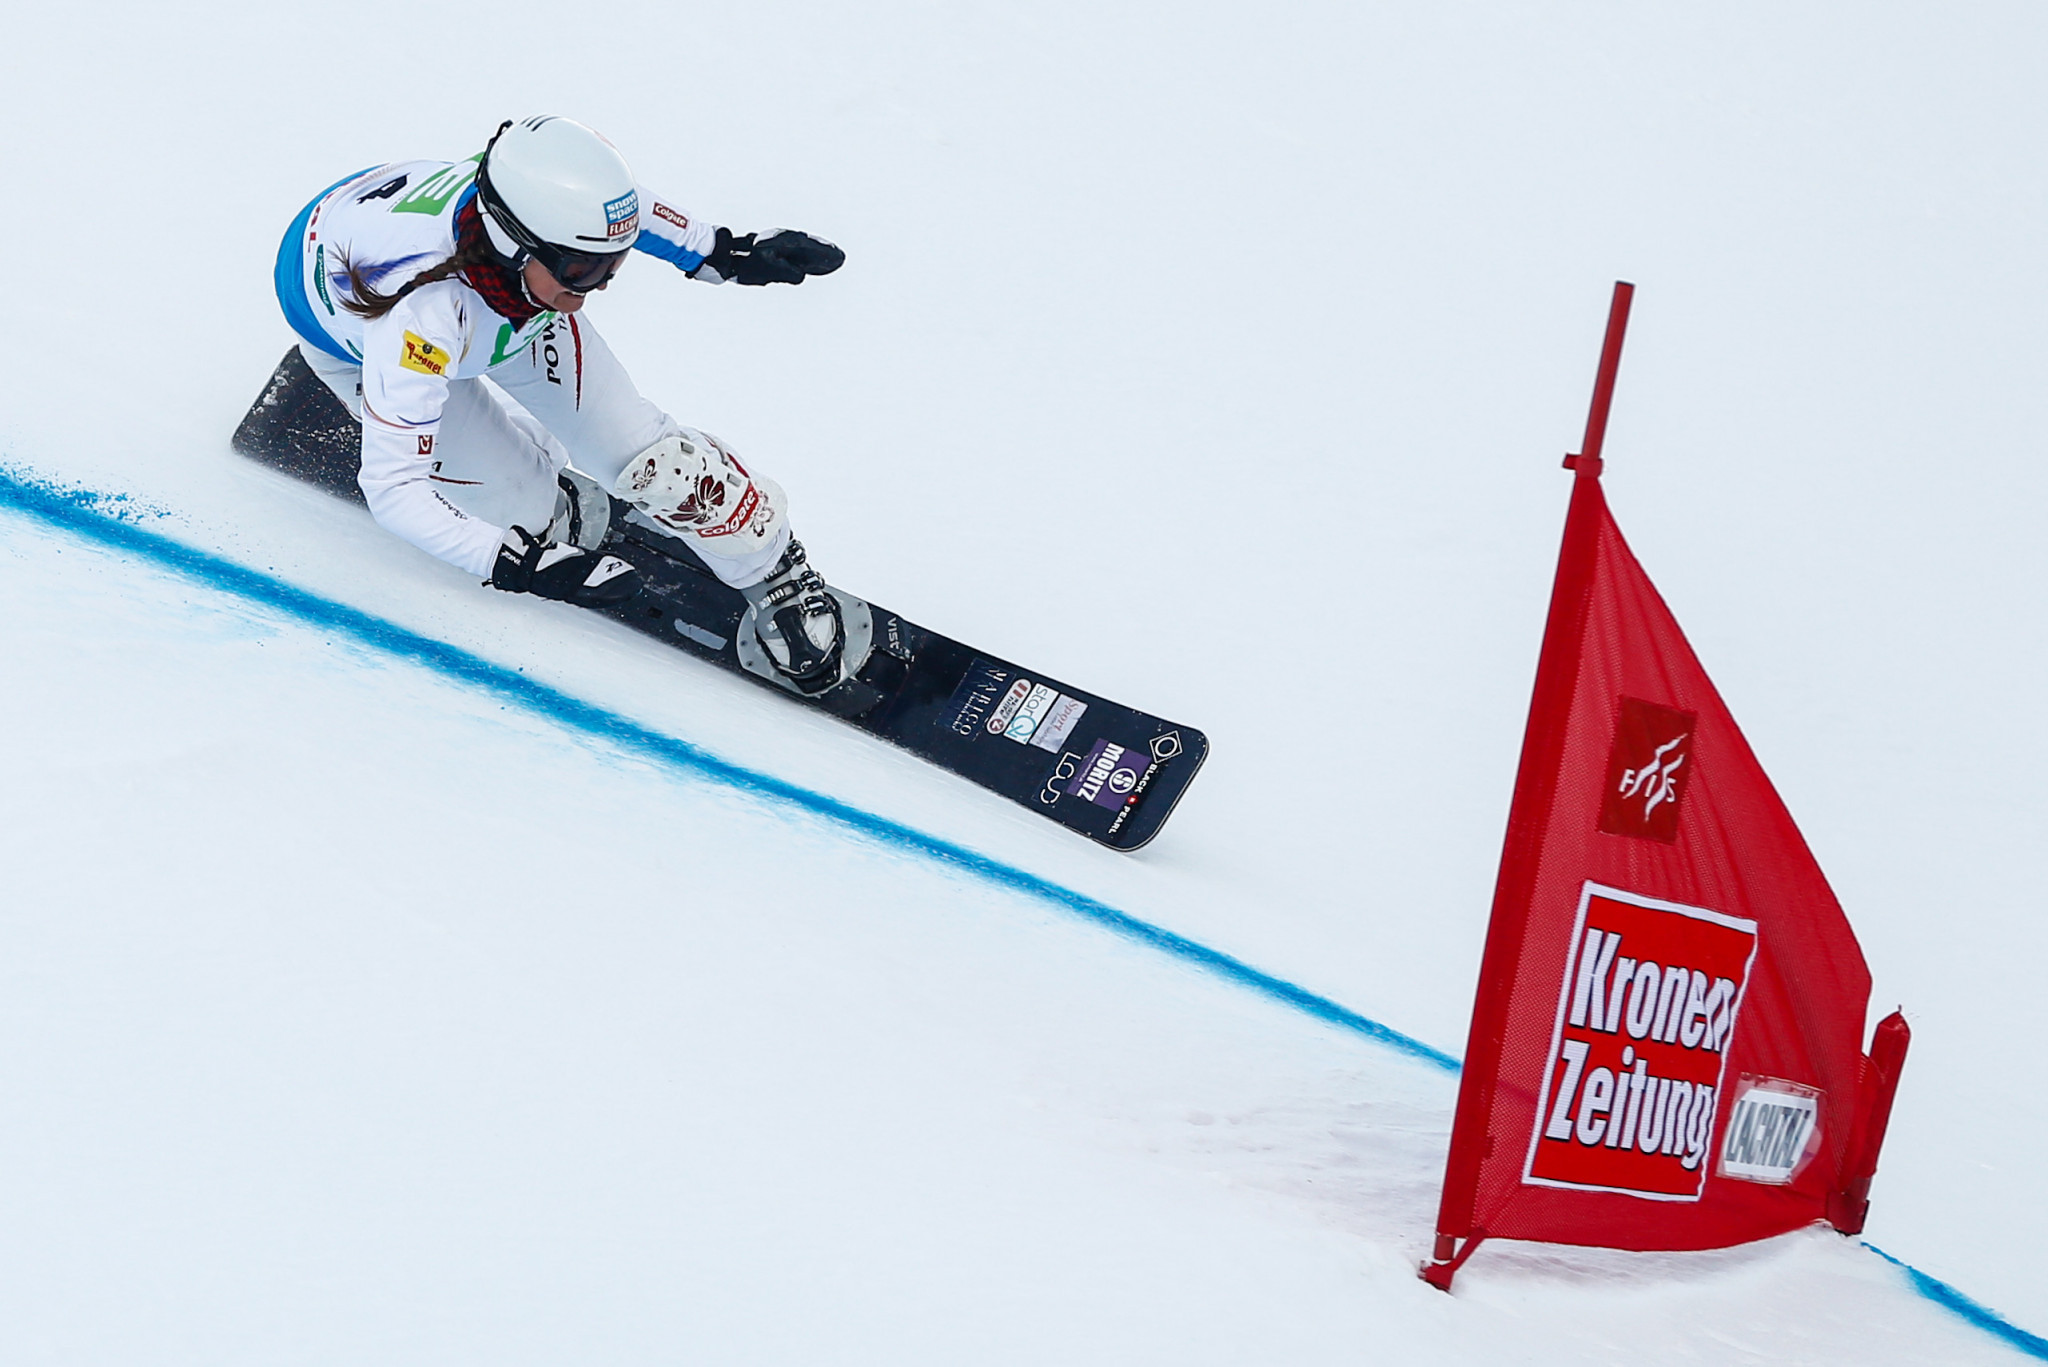 Austria's Claudia Riegler triumphed at the age of 45 in Bad Gastein ©Getty Images